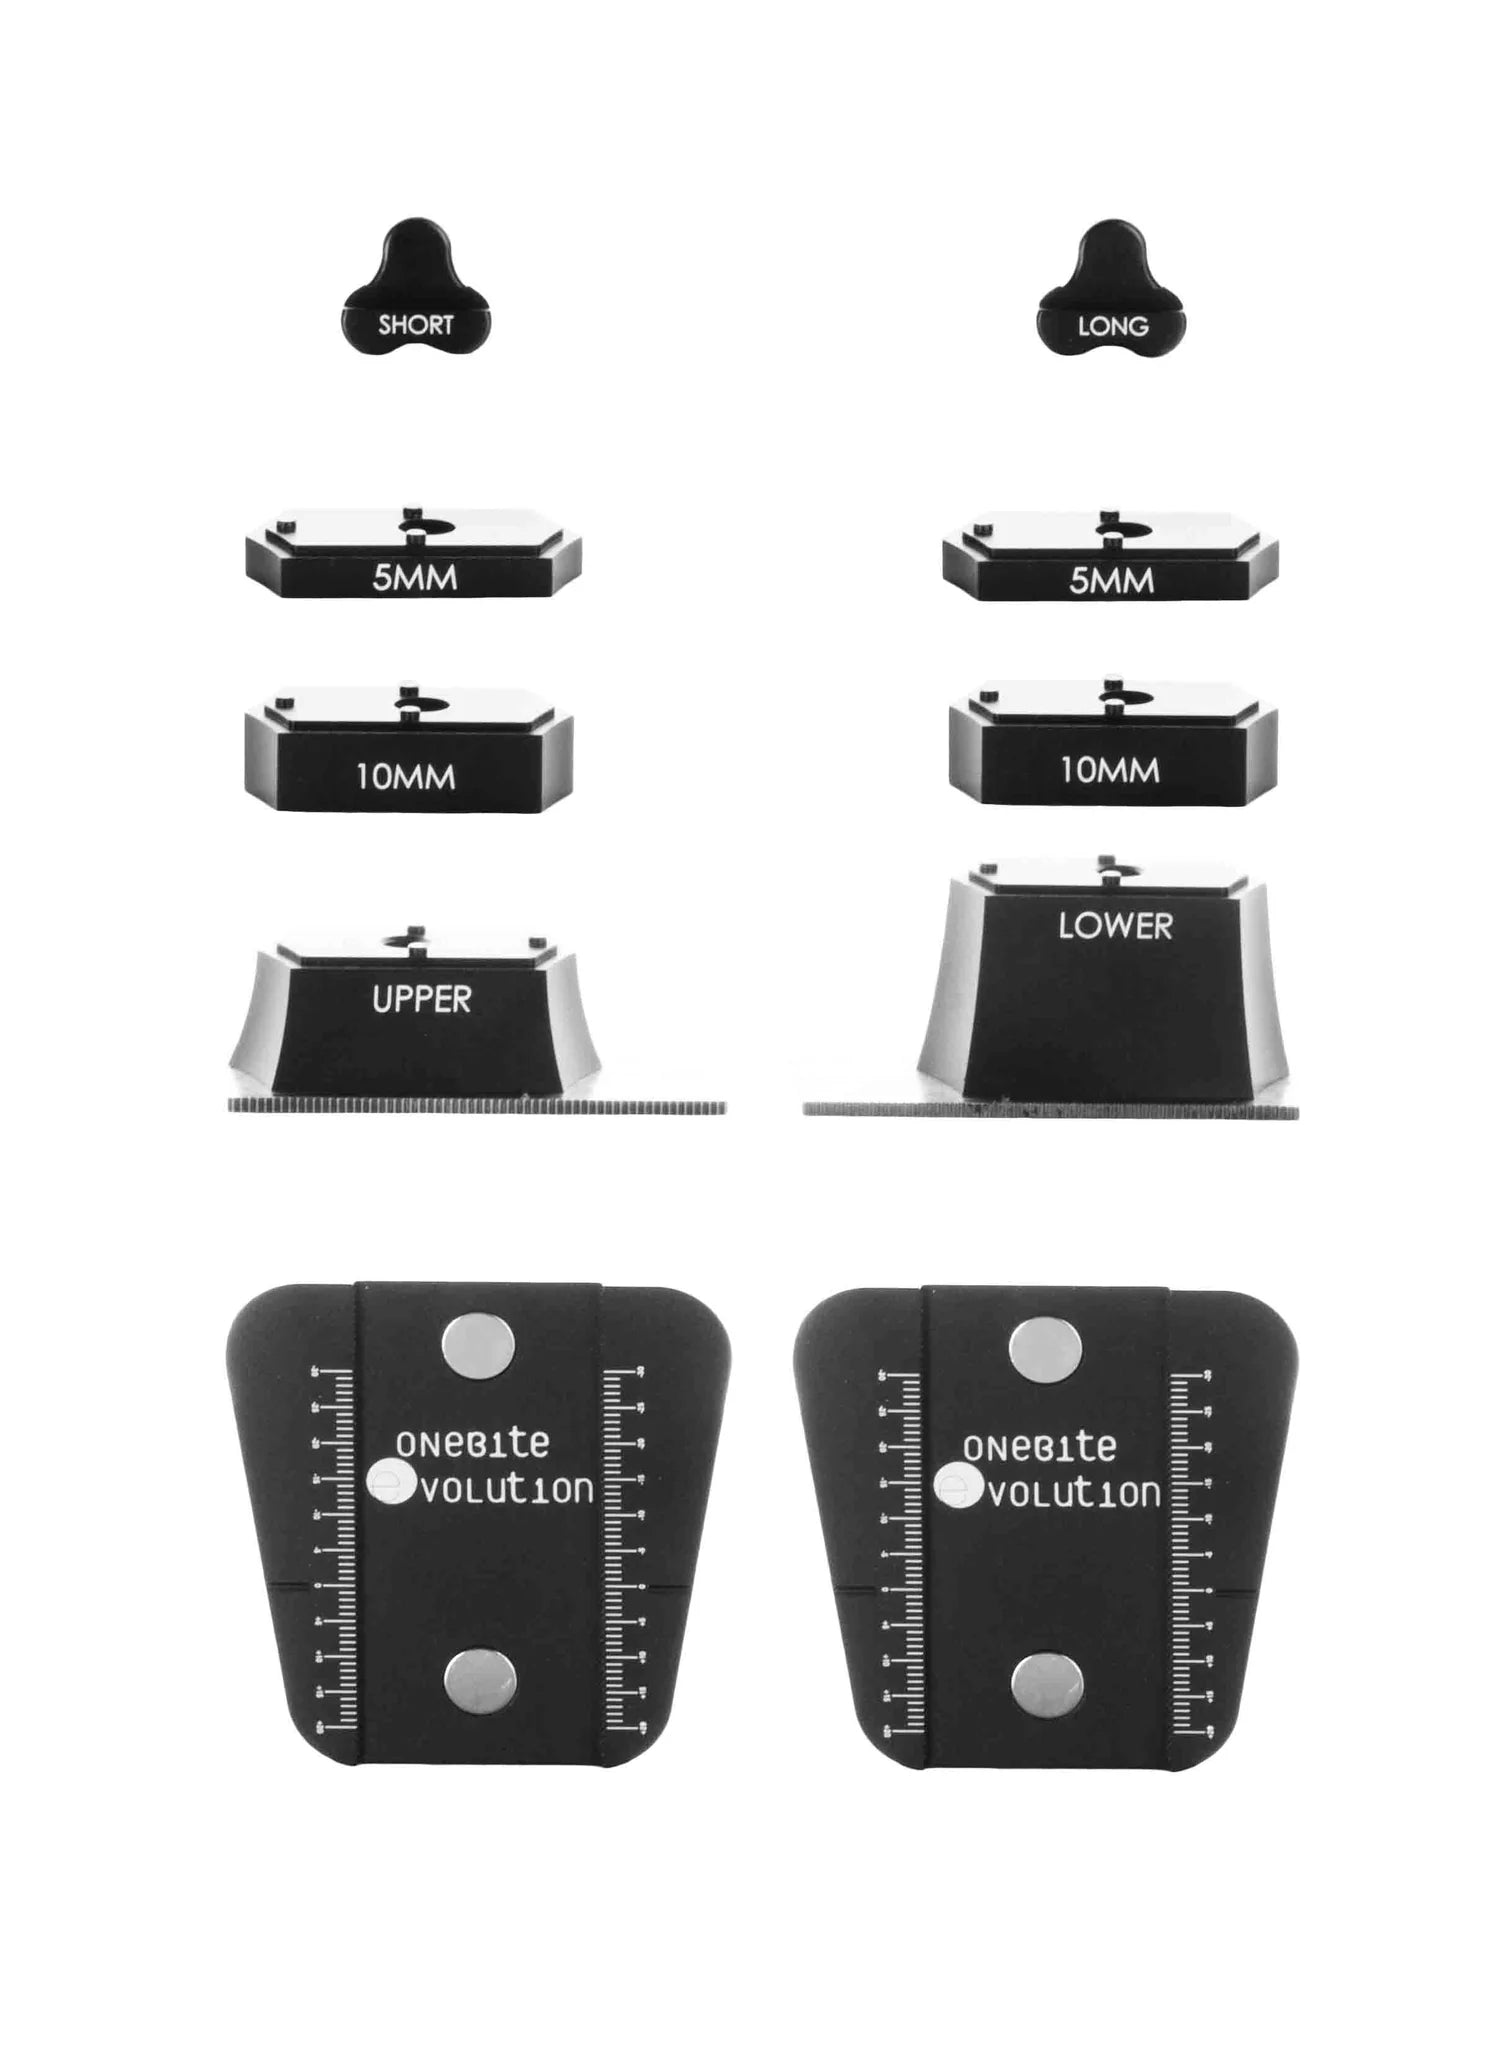 Digital Mounting Adapter (Price: $500, With a System Purchase or Serial Number)